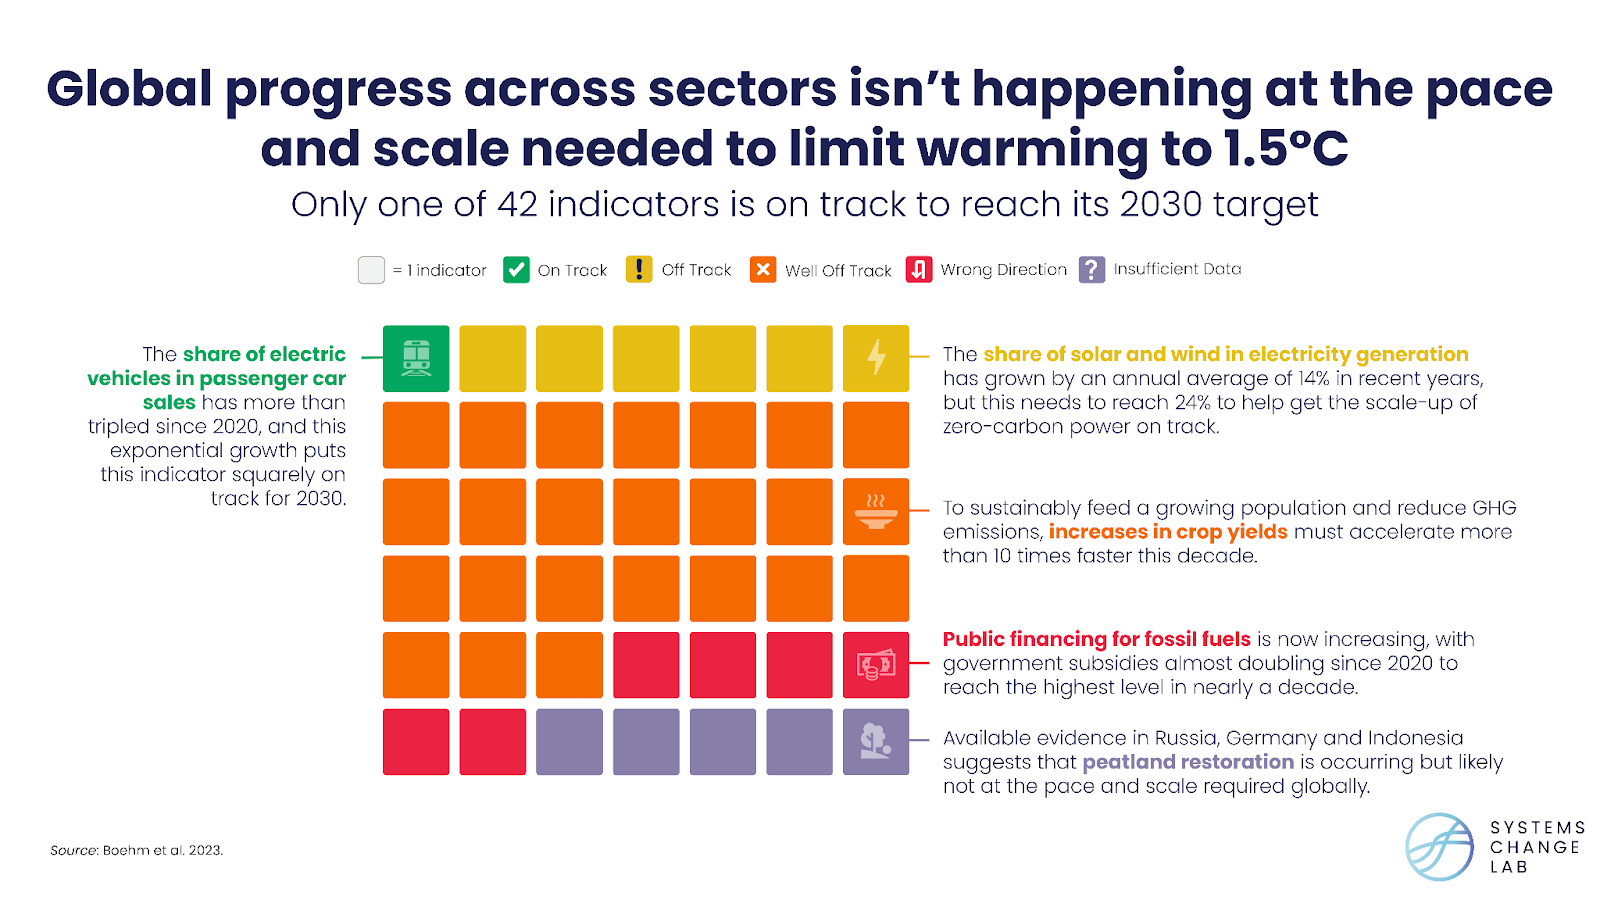 Climate action is off track across 40 indicators